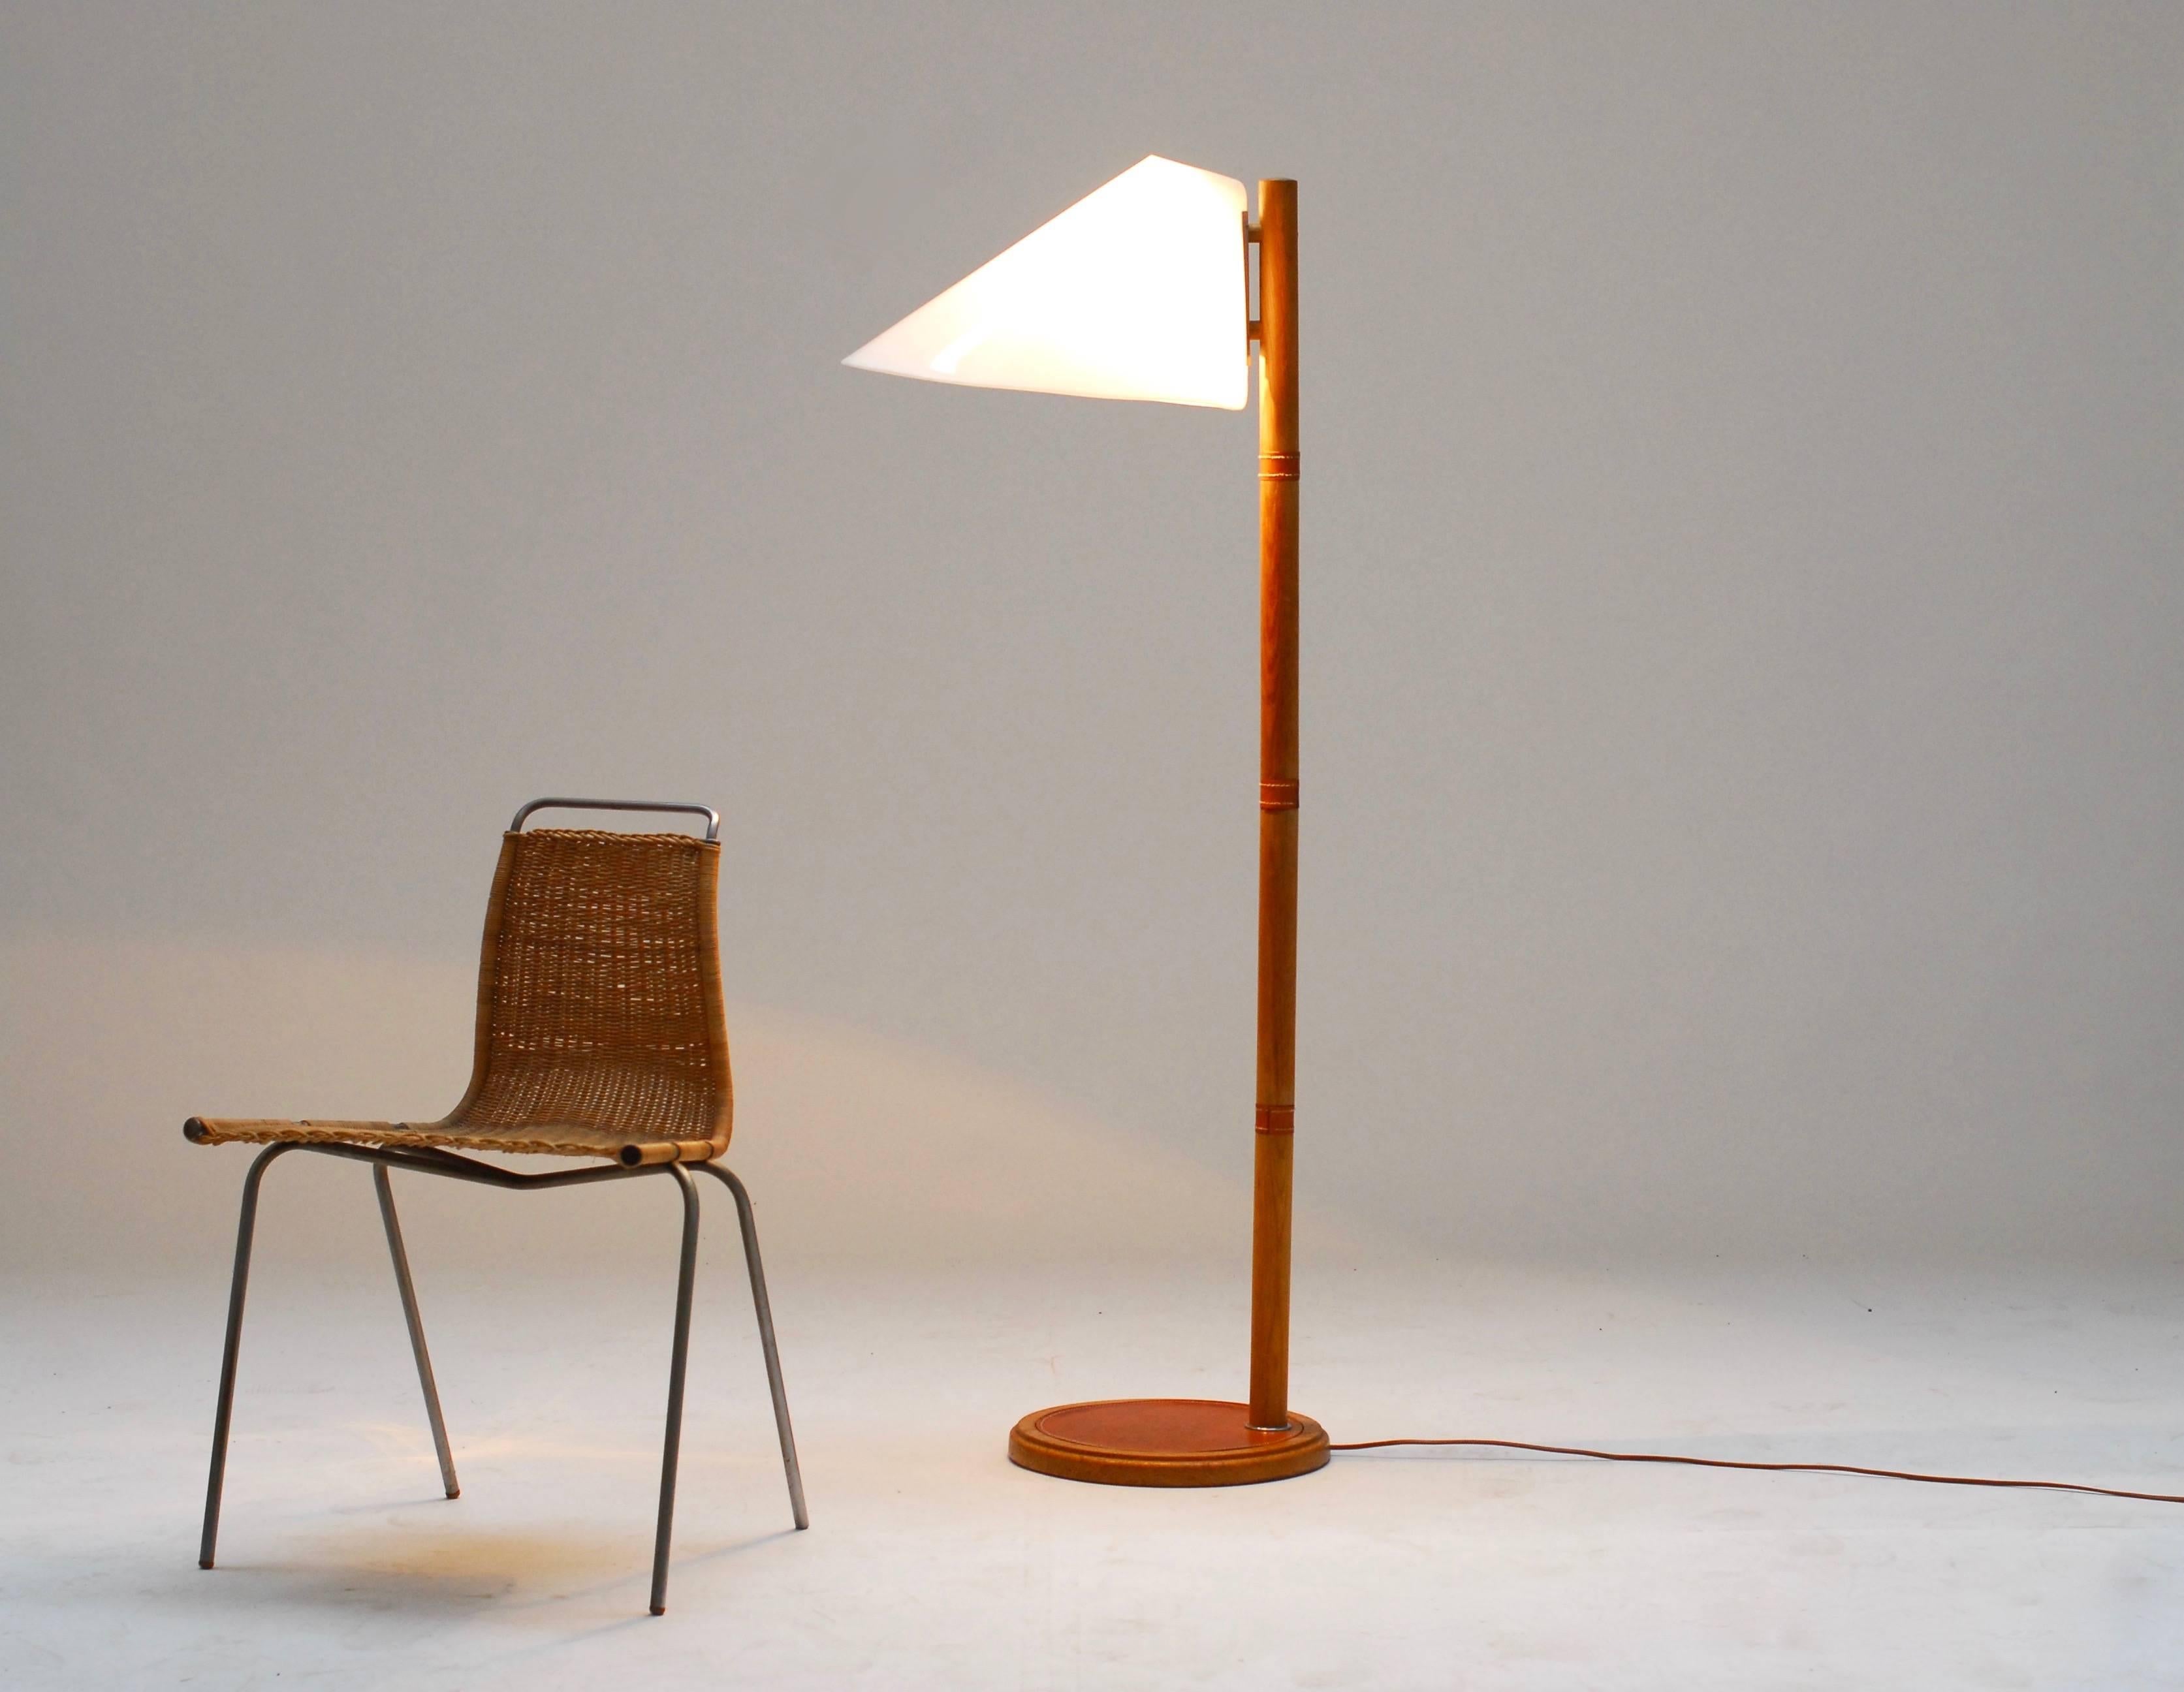 Great reading lamp made of oak, leather and plexiglass. A truly typical, clean and practical Scandinavian example of design.
All is in a very good vintage condition. Minor hairline crack in the plexi glass at the point where it is screwed onto the